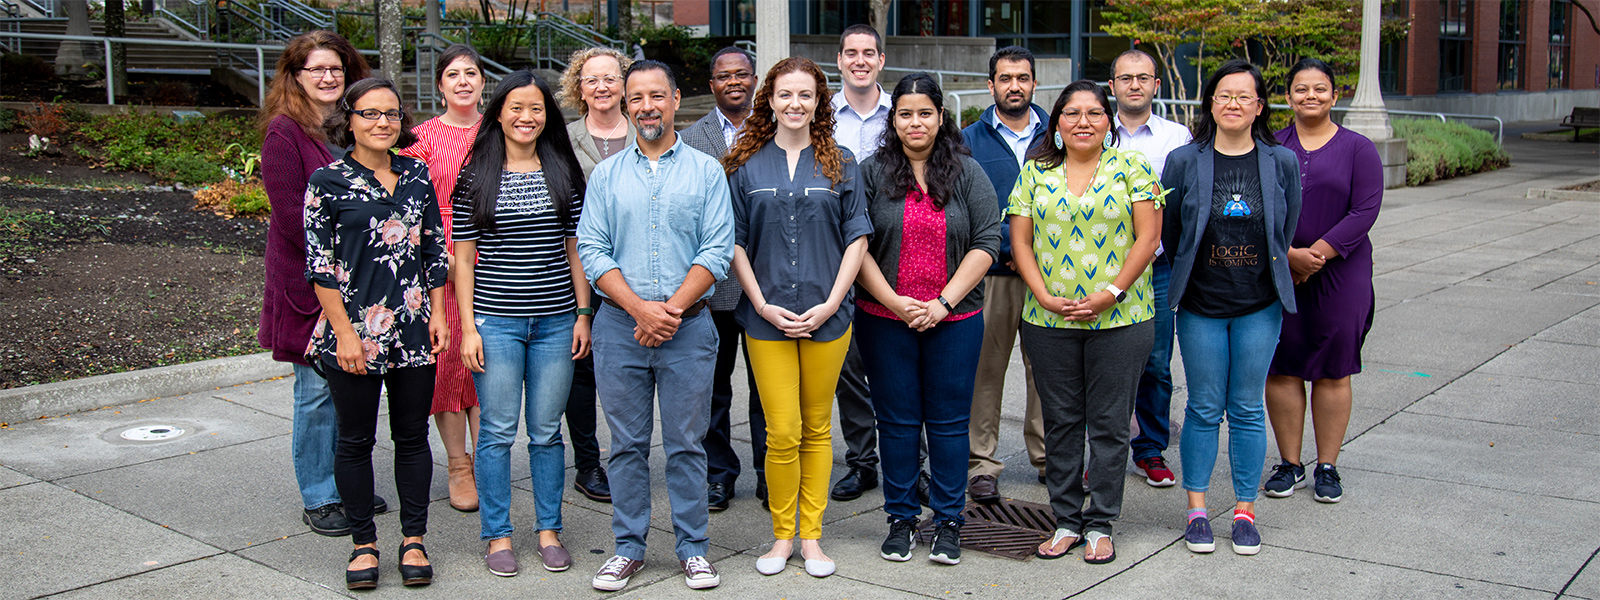 Group photo of new faculty at UW Tacoma for academic year 2019-20